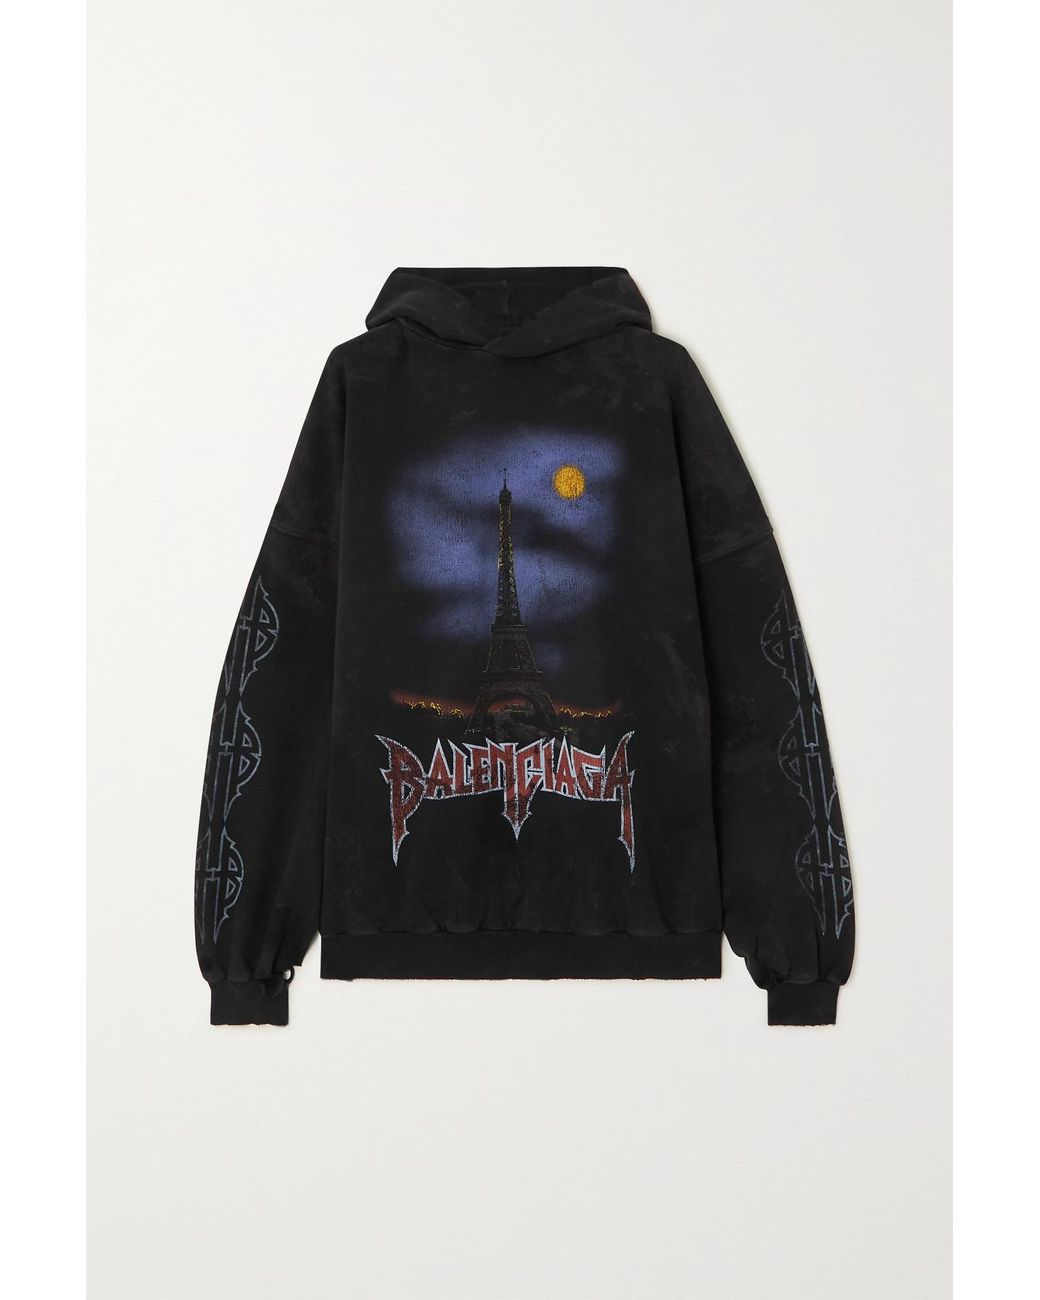 Balenciaga Oversized Distressed Printed Cotton-jersey Hoodie in Black | Lyst